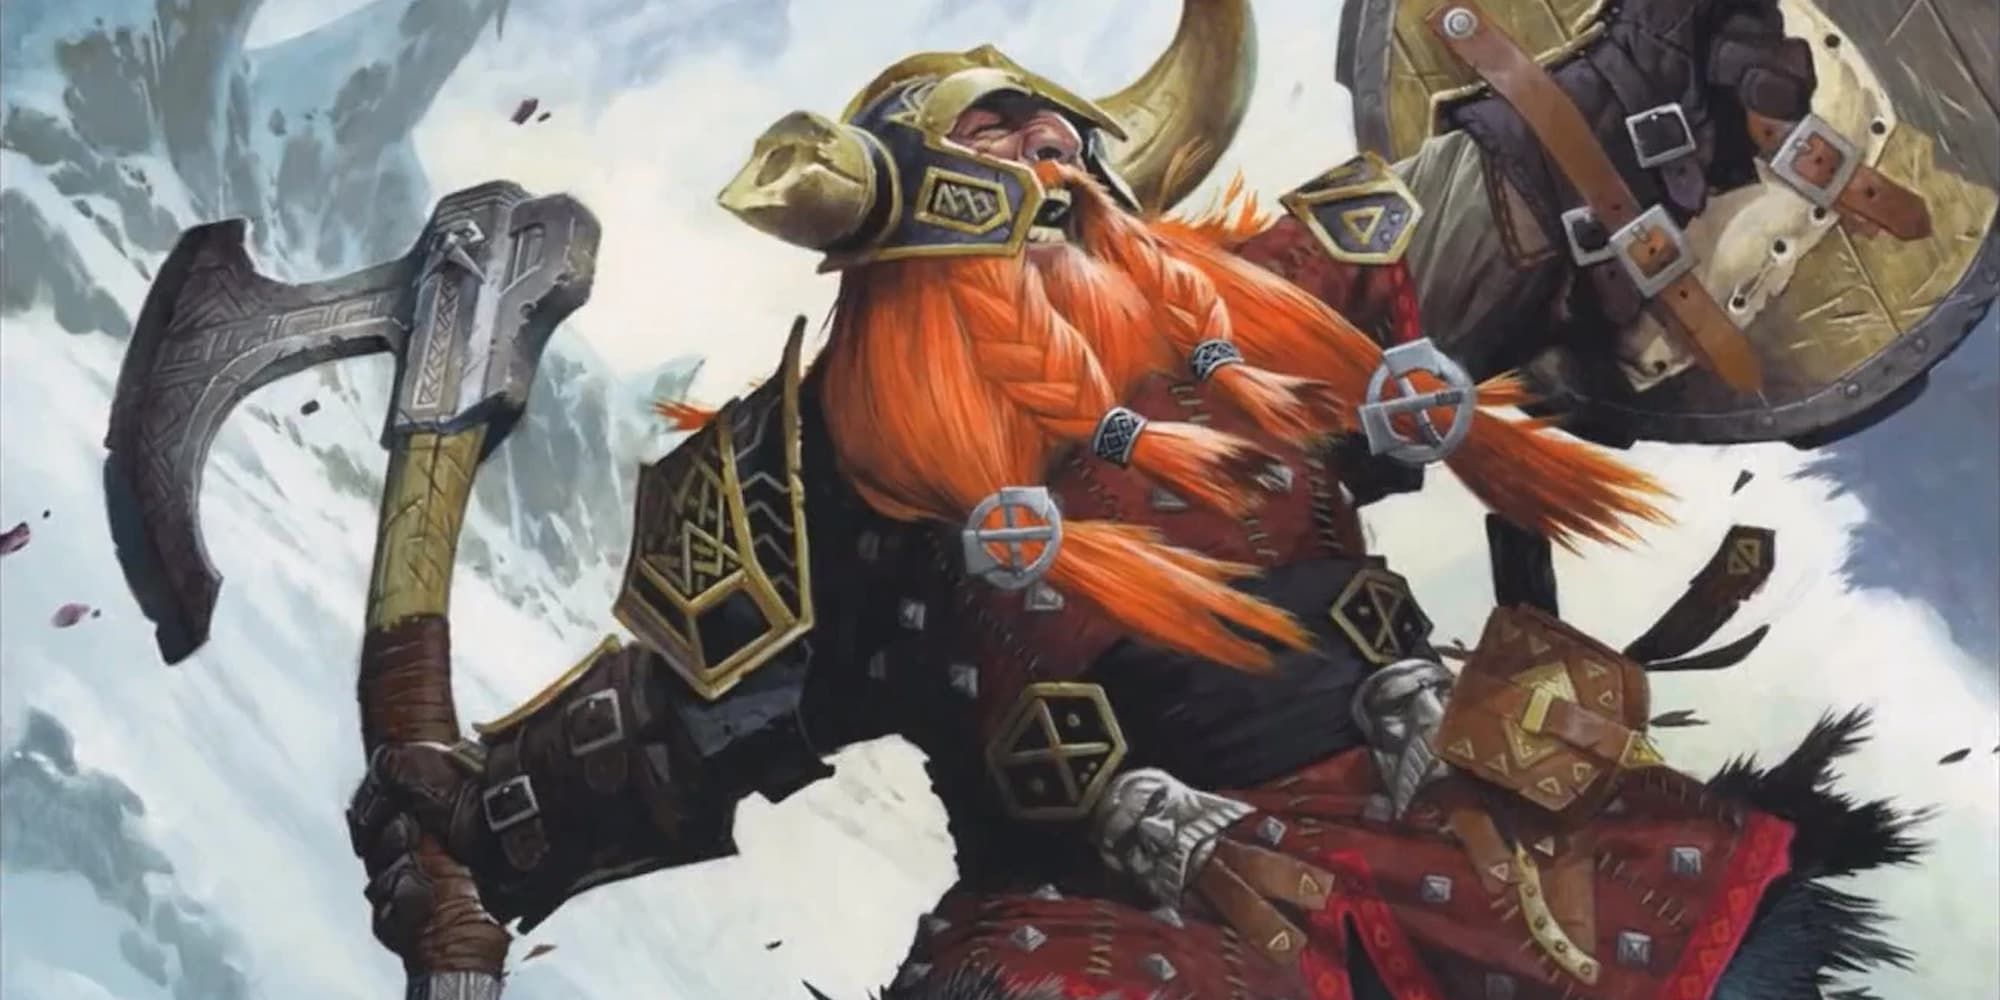 Bruenor Battlehammer wielding a shield and axe with an expression of rage whilst on a snowy mountain